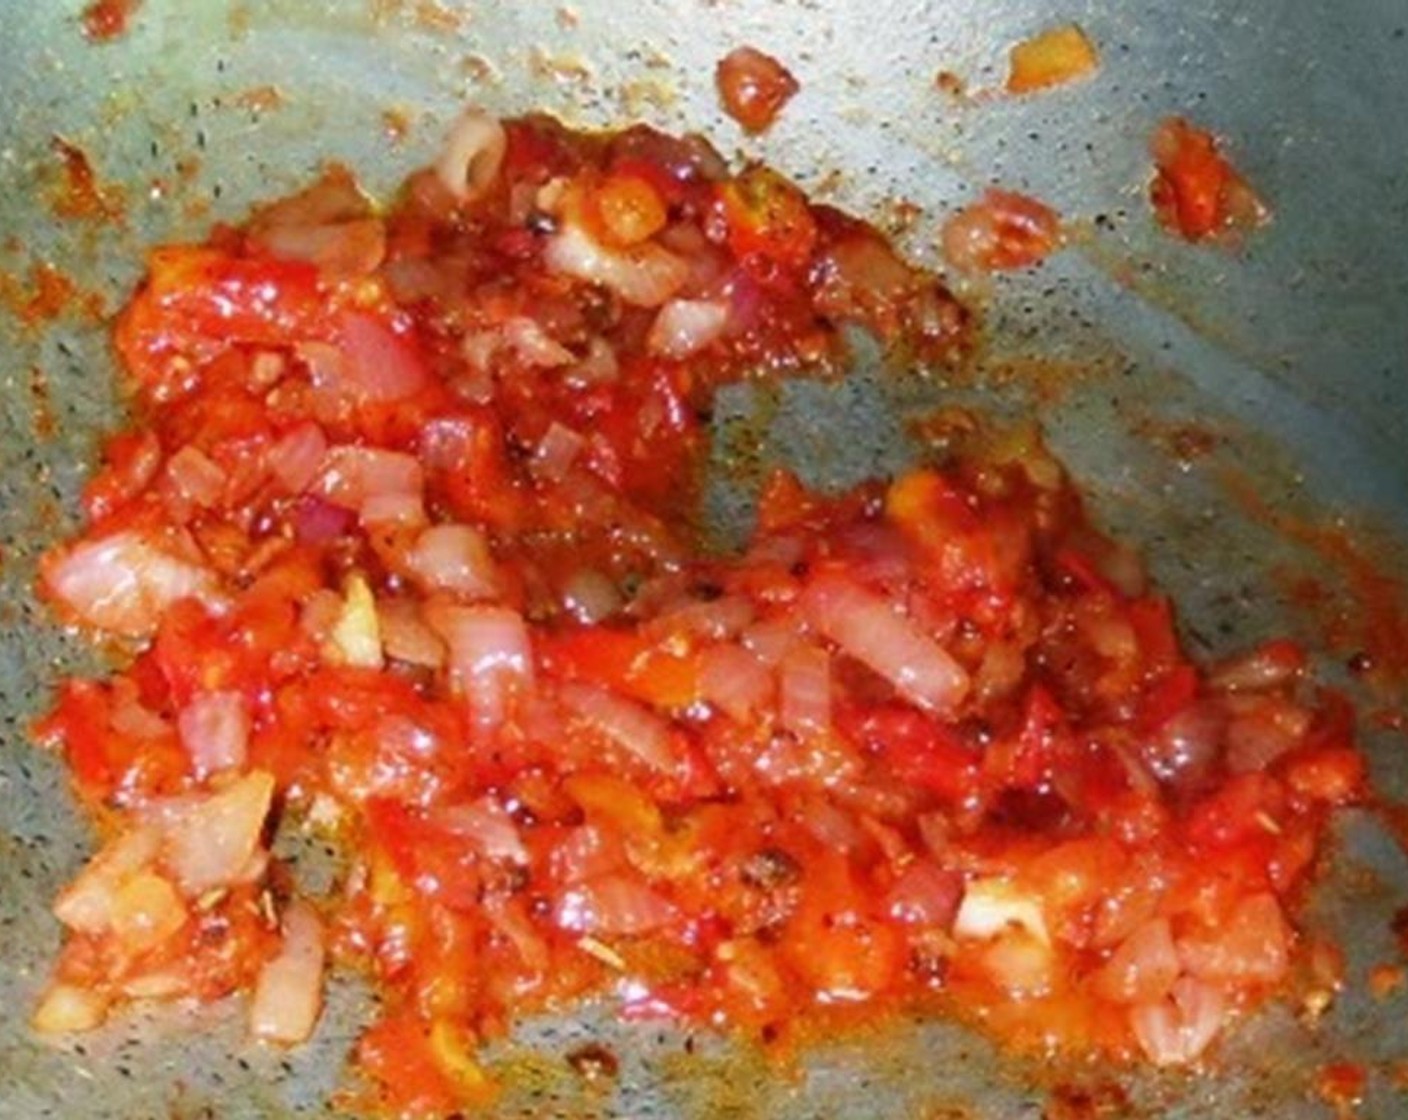 step 5 Once the tomato reduces to a mush, season with Salt (to taste) and Freshly Ground Black Pepper (1/2 Tbsp). Add Tomato Paste (1/2 Tbsp) and Dried Oregano (1/2 Tbsp). Mix well and let it cook for another 2-3 minutes.